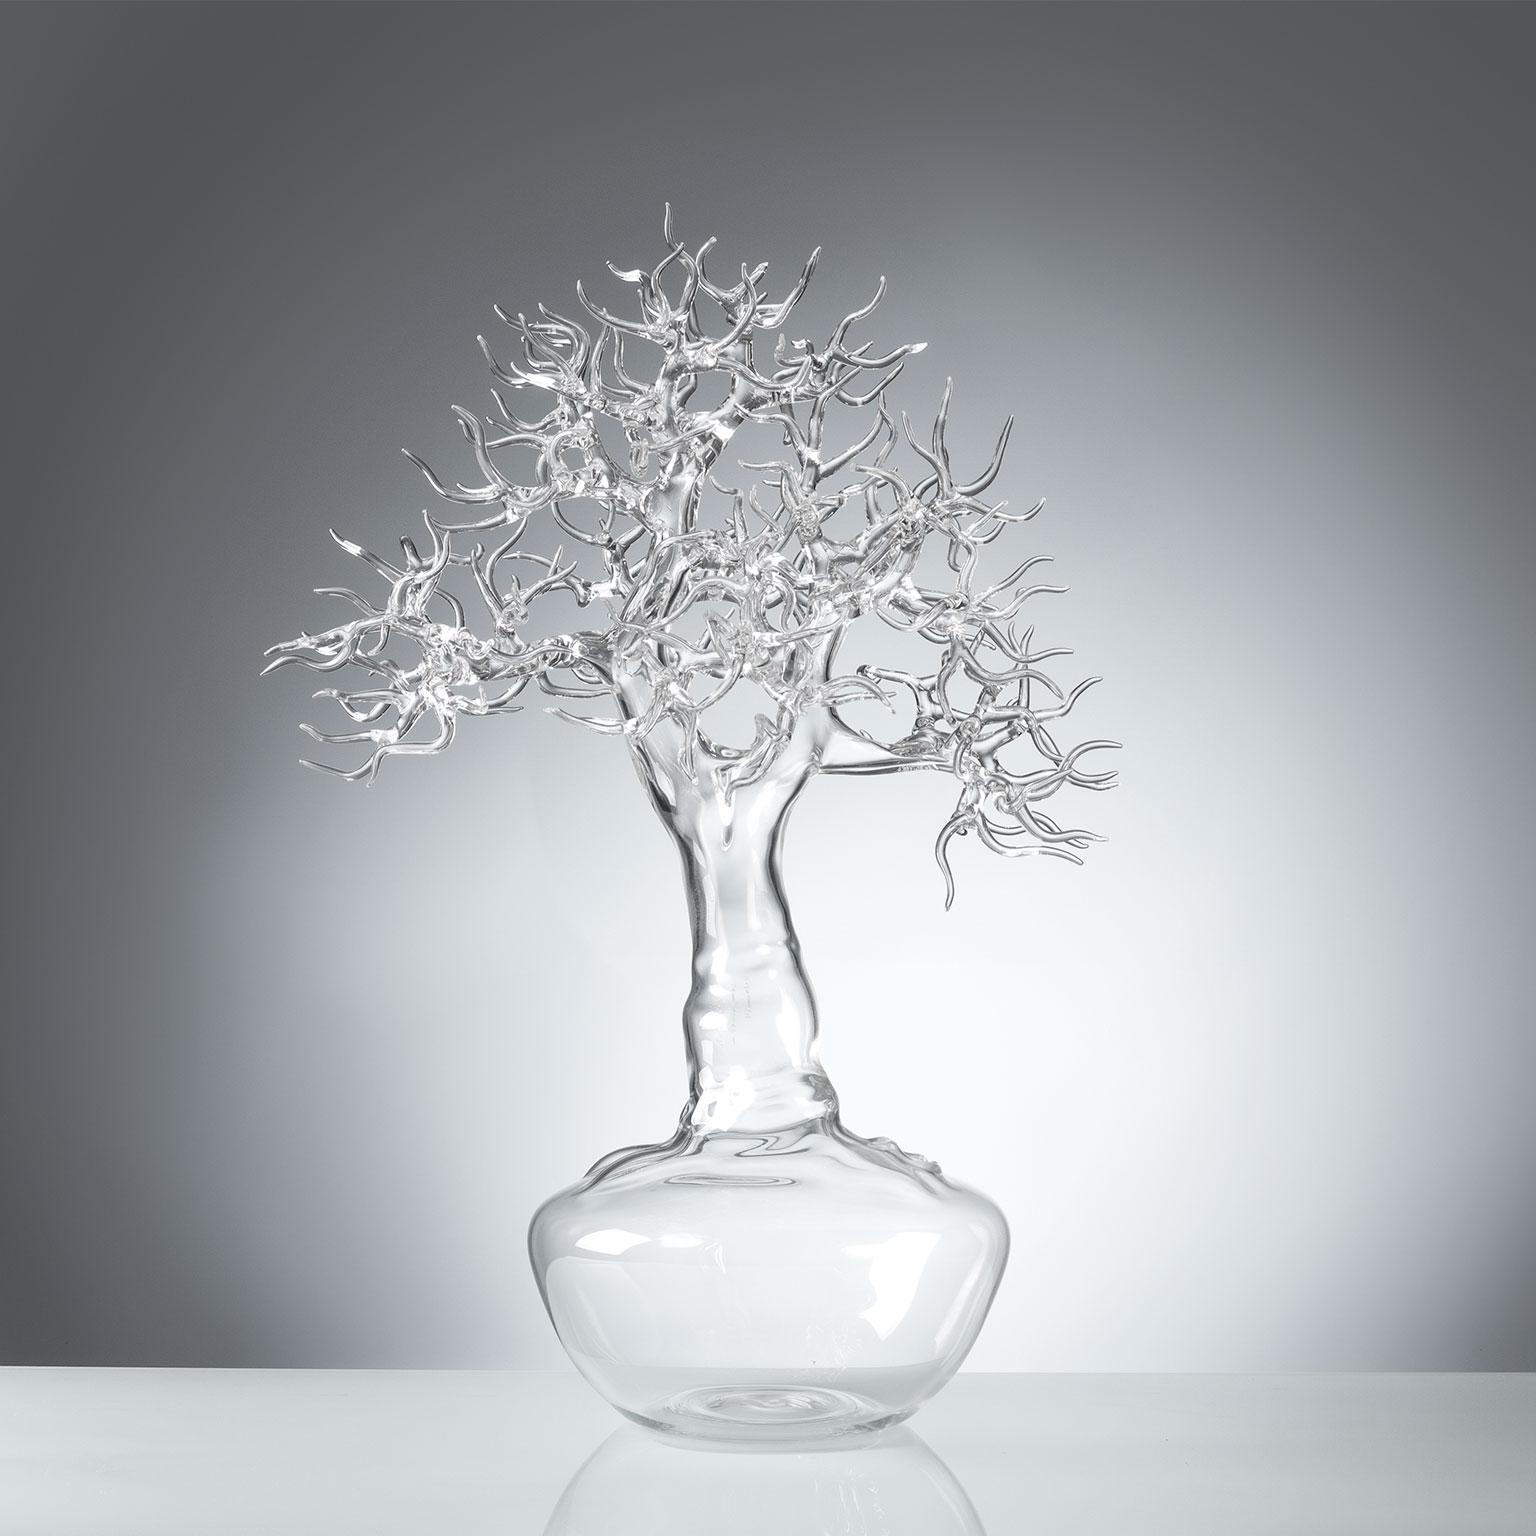 Hand blown glass sculpture representing a bonsai tree.

Artist: Simone Crestani
Material: borosilicate glass
Technique: flame working
Unique piece
Year: 2017
Measures: Height 20.8”, width 11.8”, depth 14.3”.
Signed and dated on the trunk.